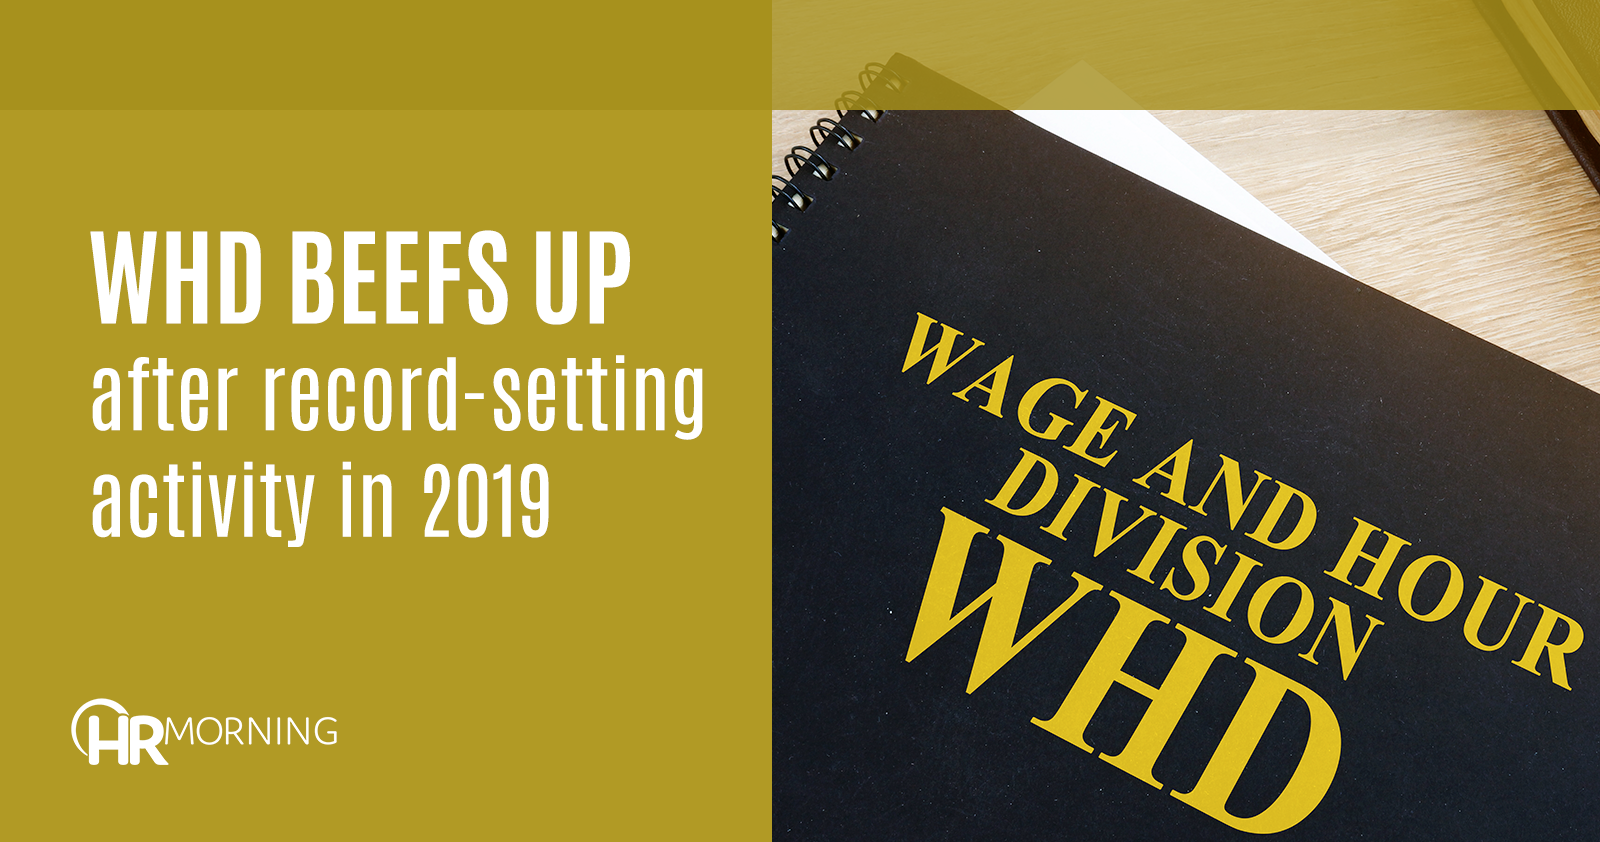 whd beefs up after record setting activity in 2019